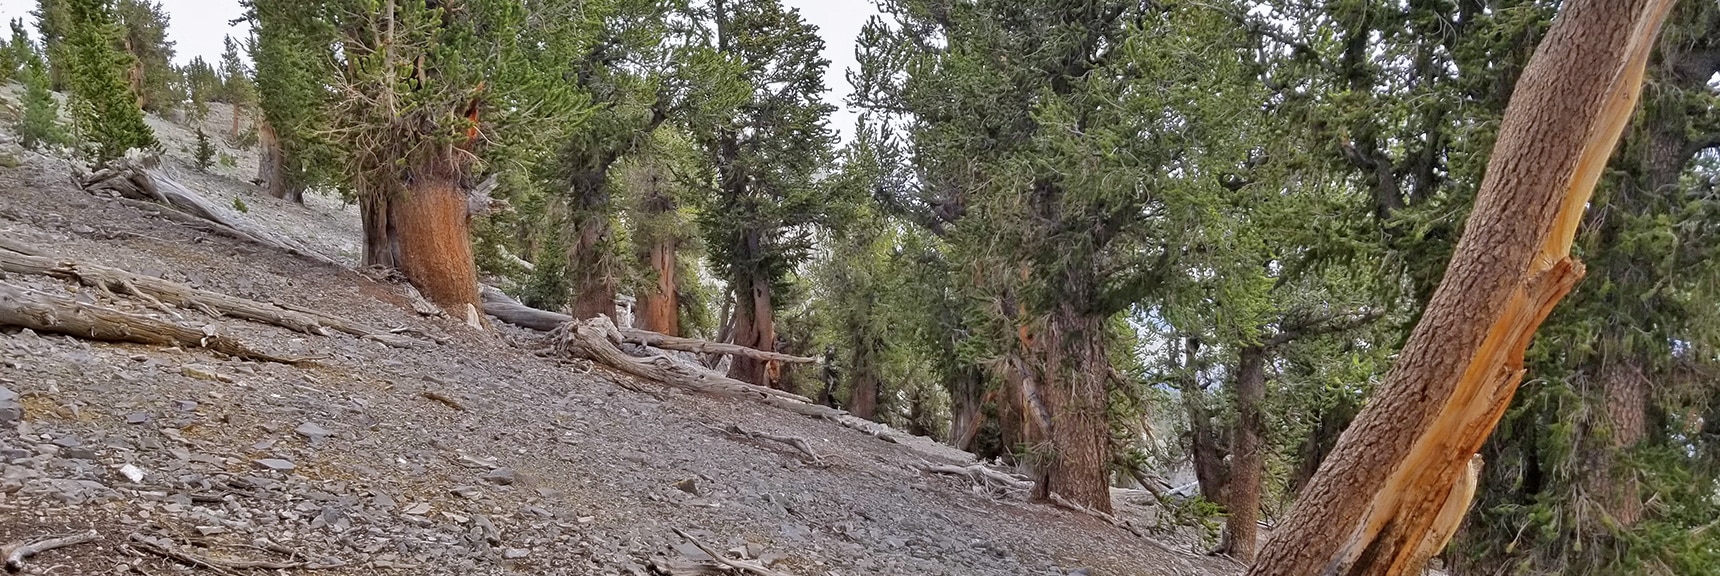 Searching for the Location of the NE Cliff Chute Entrance | Mummy Mountain NE Cliffs Descent | Mt Charleston Wilderness | Spring Mountains, Nevada